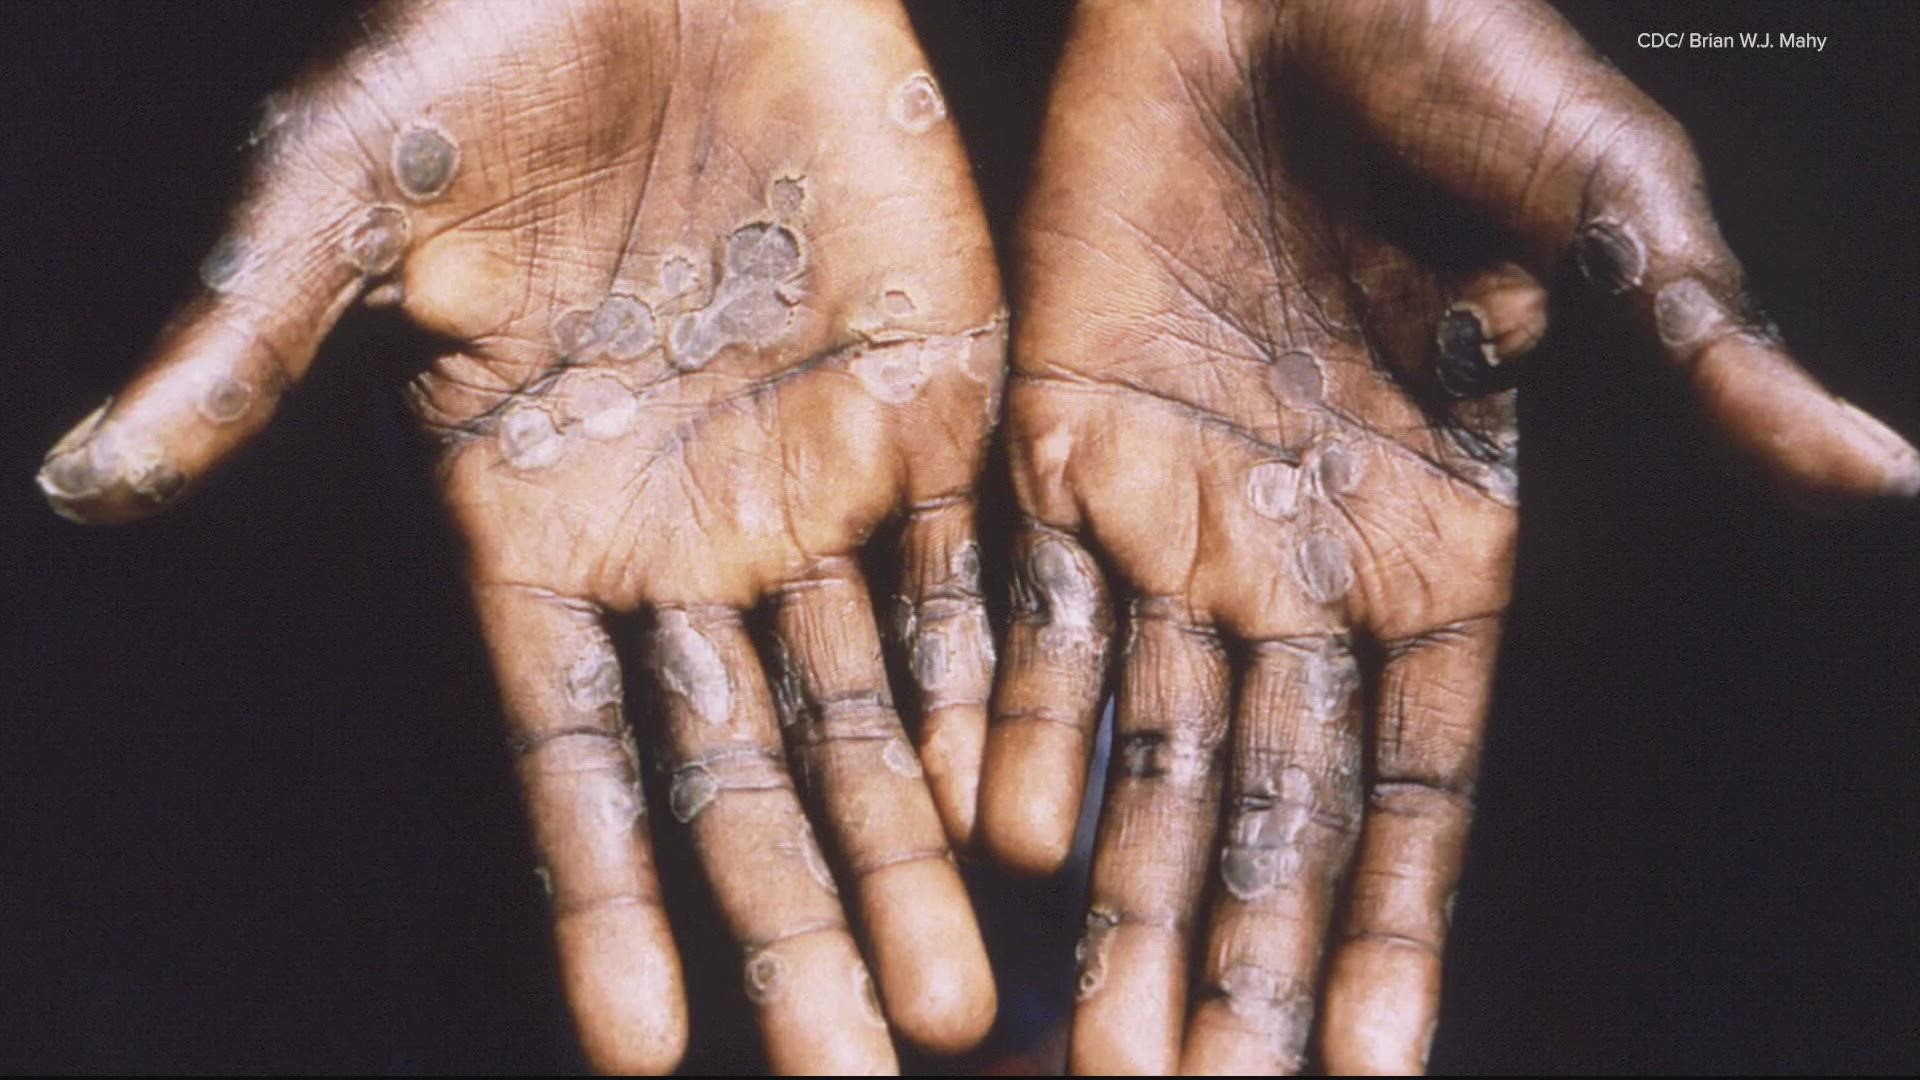 On May 18, a Massachusetts man tested positive for monkeypox. Here are 4 fast facts about the rare virus.